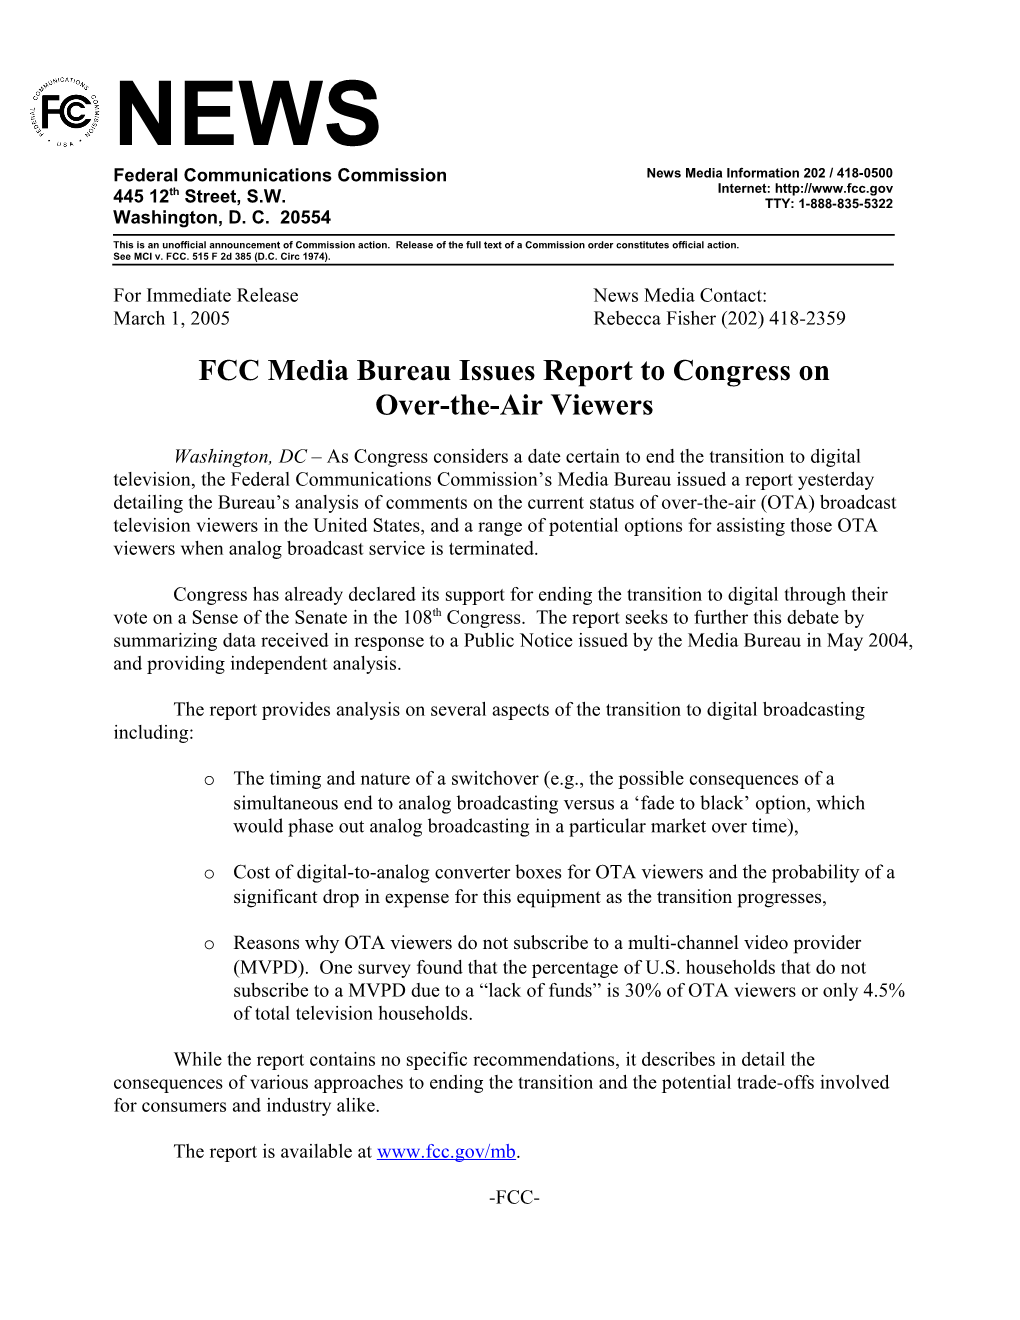 FCC Media Bureau Issues Report to Congress On